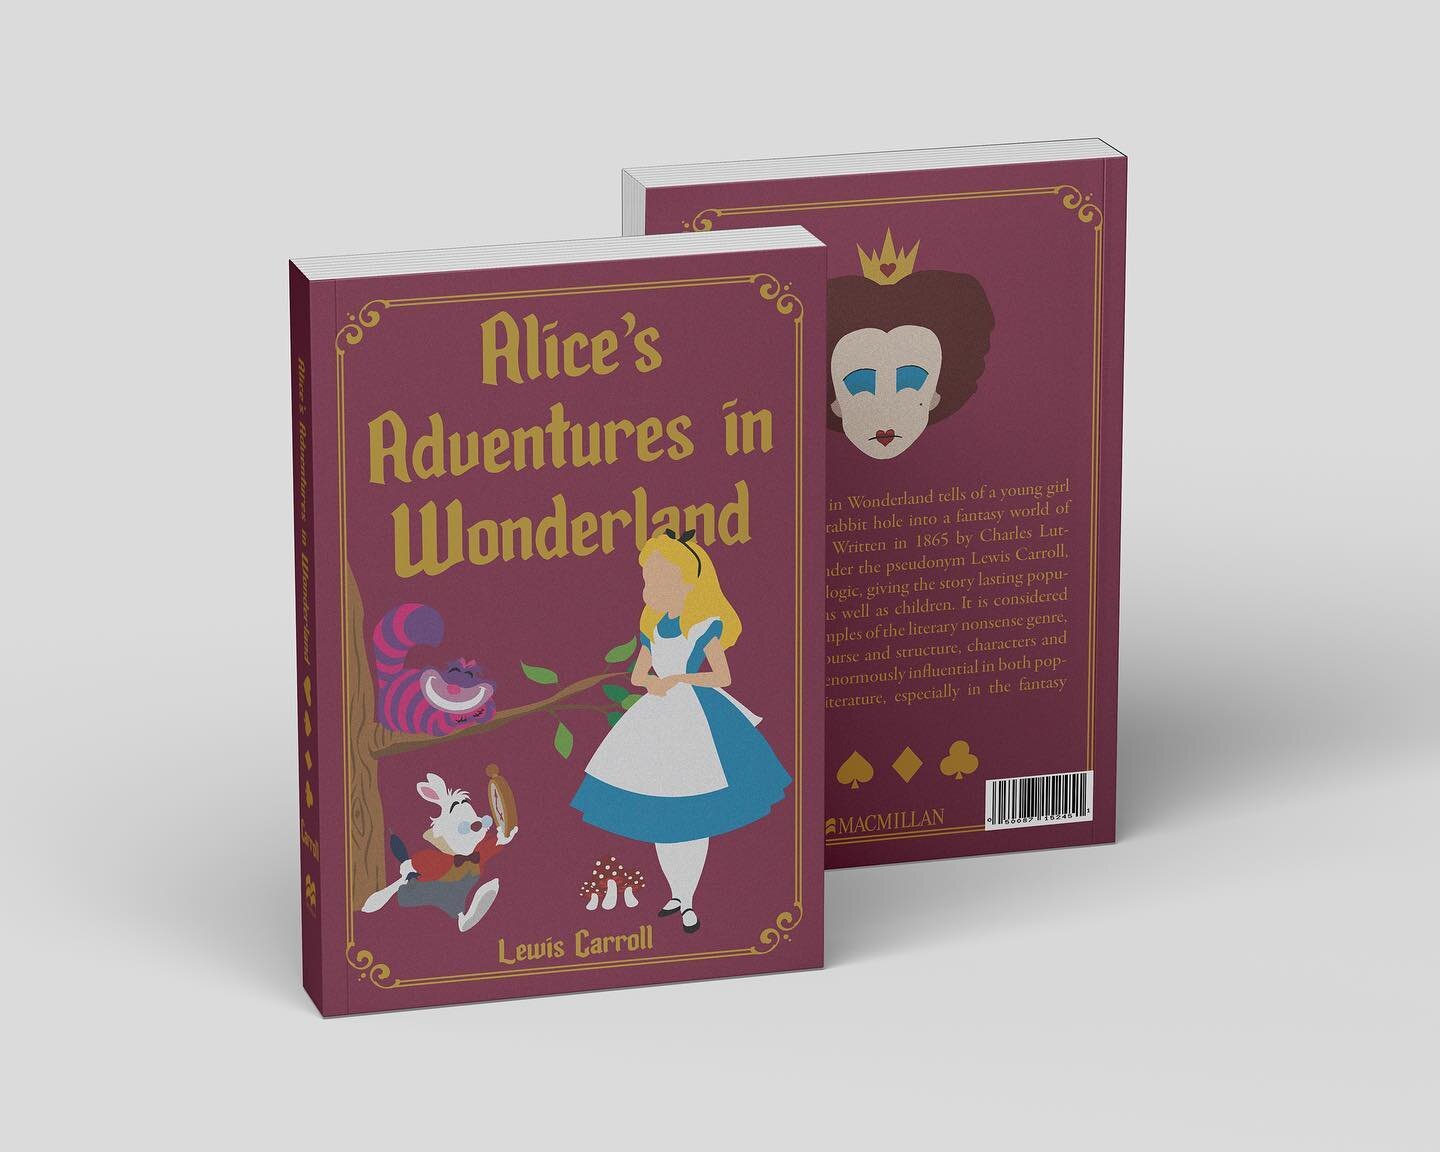 🎶If you go chasing rabbits
And you know you're going to fall,
Tell 'em a hookah smoking caterpillar
Has given you the call&hellip;🎶

Alice&rsquo;s Adventures in Wonderland book design for class 
.
.
.
.
.
.
#book #books #aliceinwonderland #jefferso